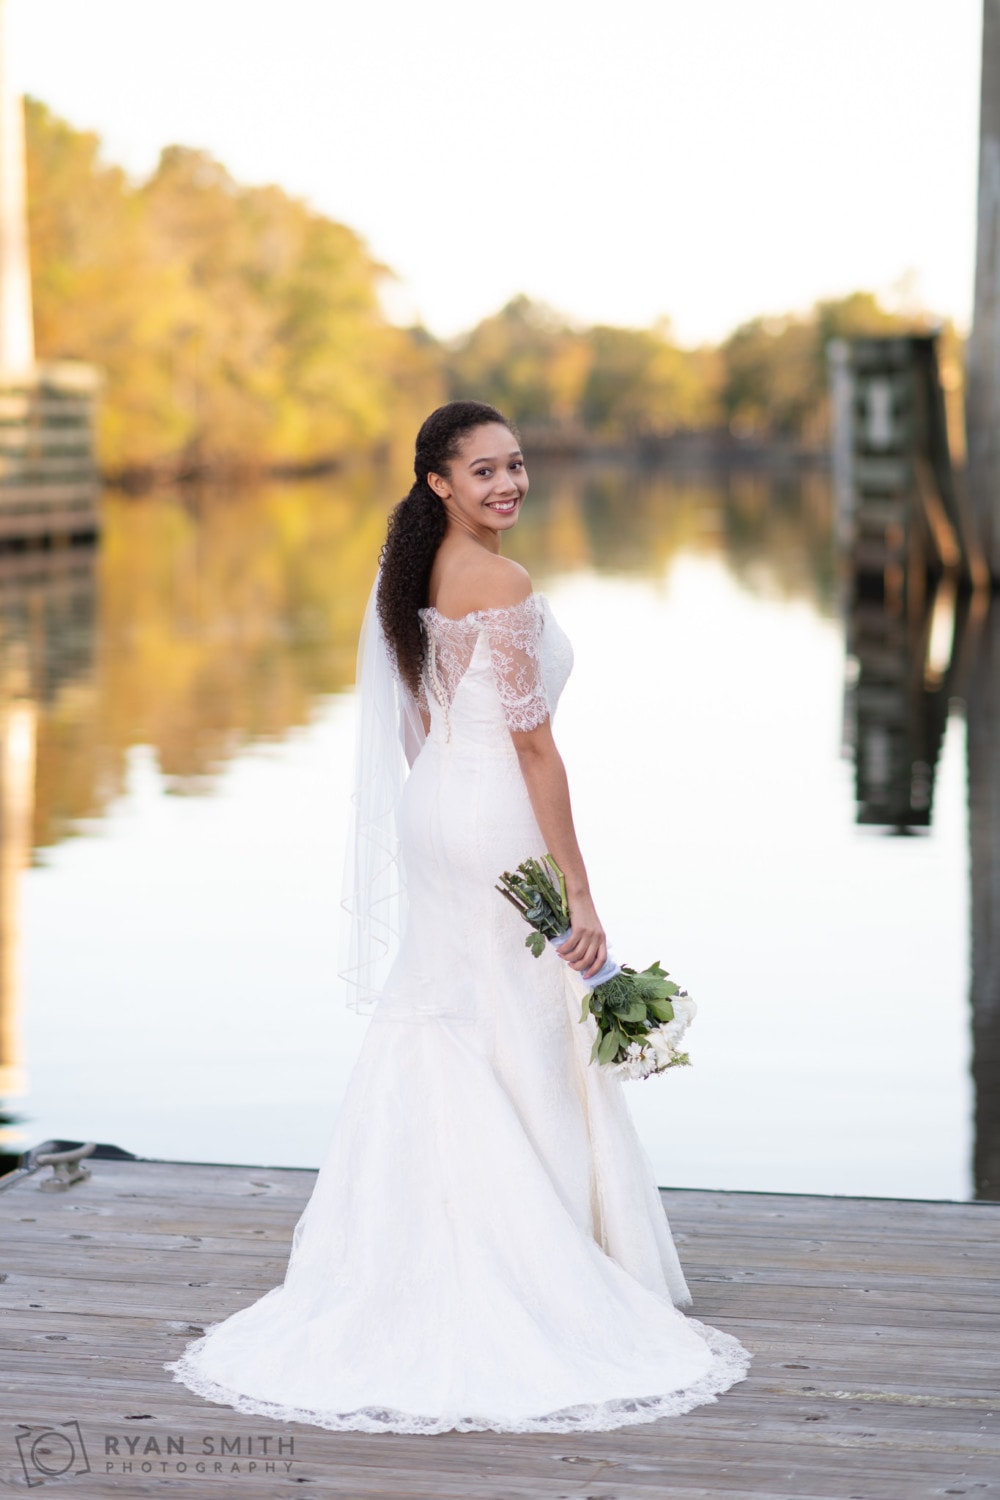 Bride looking back at the camera holding flowers - Conway Riverwalk